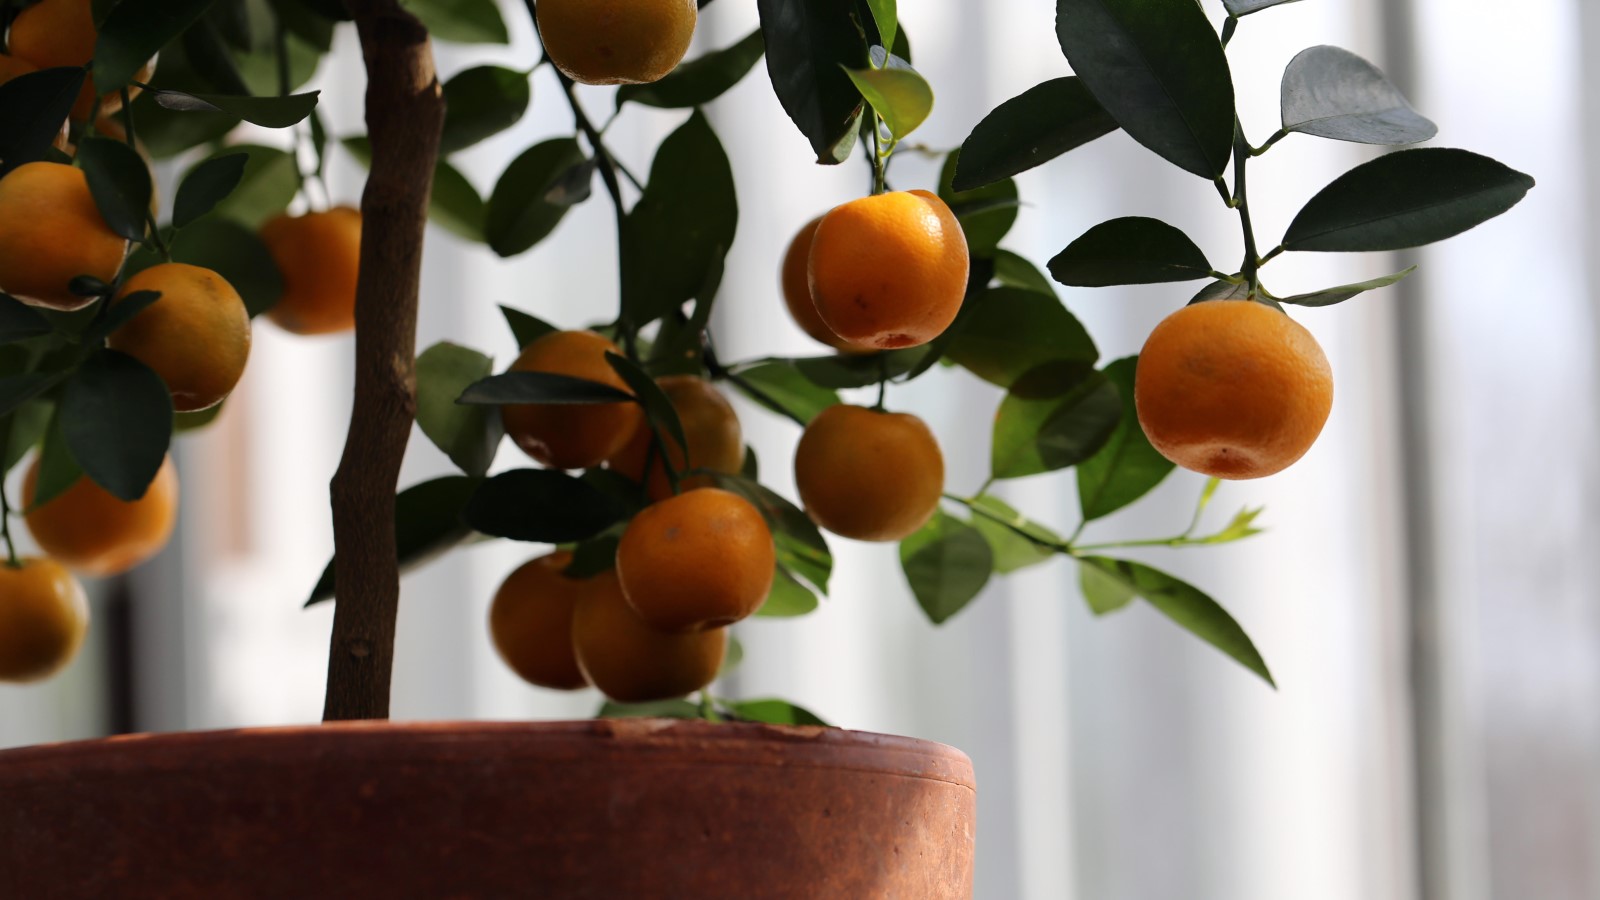 How To Grow A Tangerine Tree From Seed